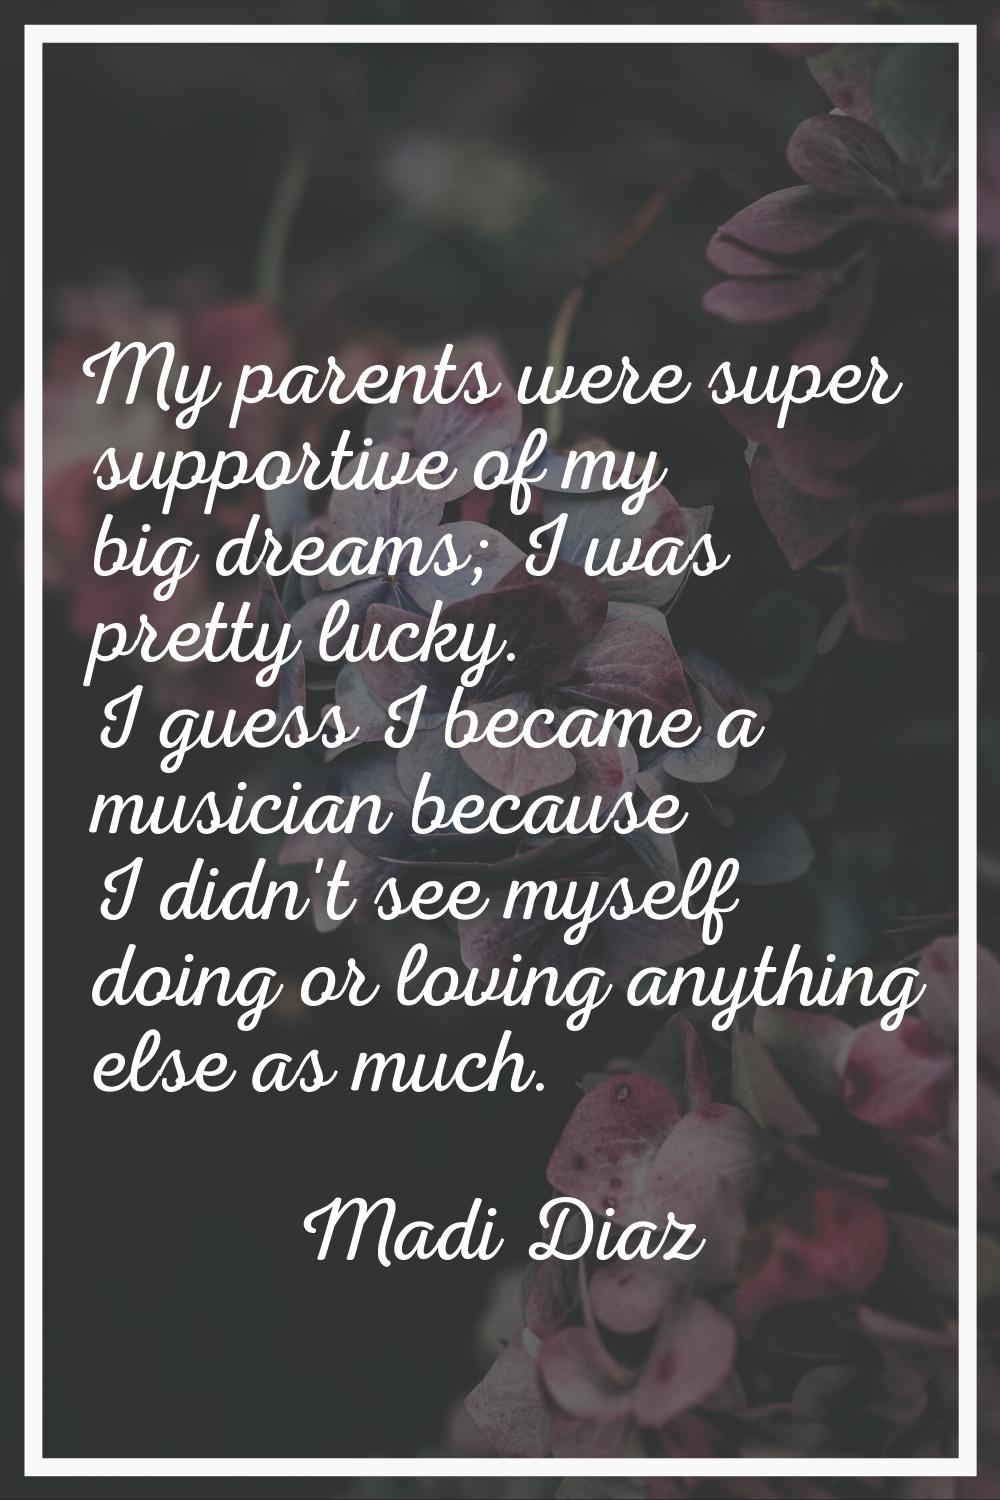 My parents were super supportive of my big dreams; I was pretty lucky. I guess I became a musician 